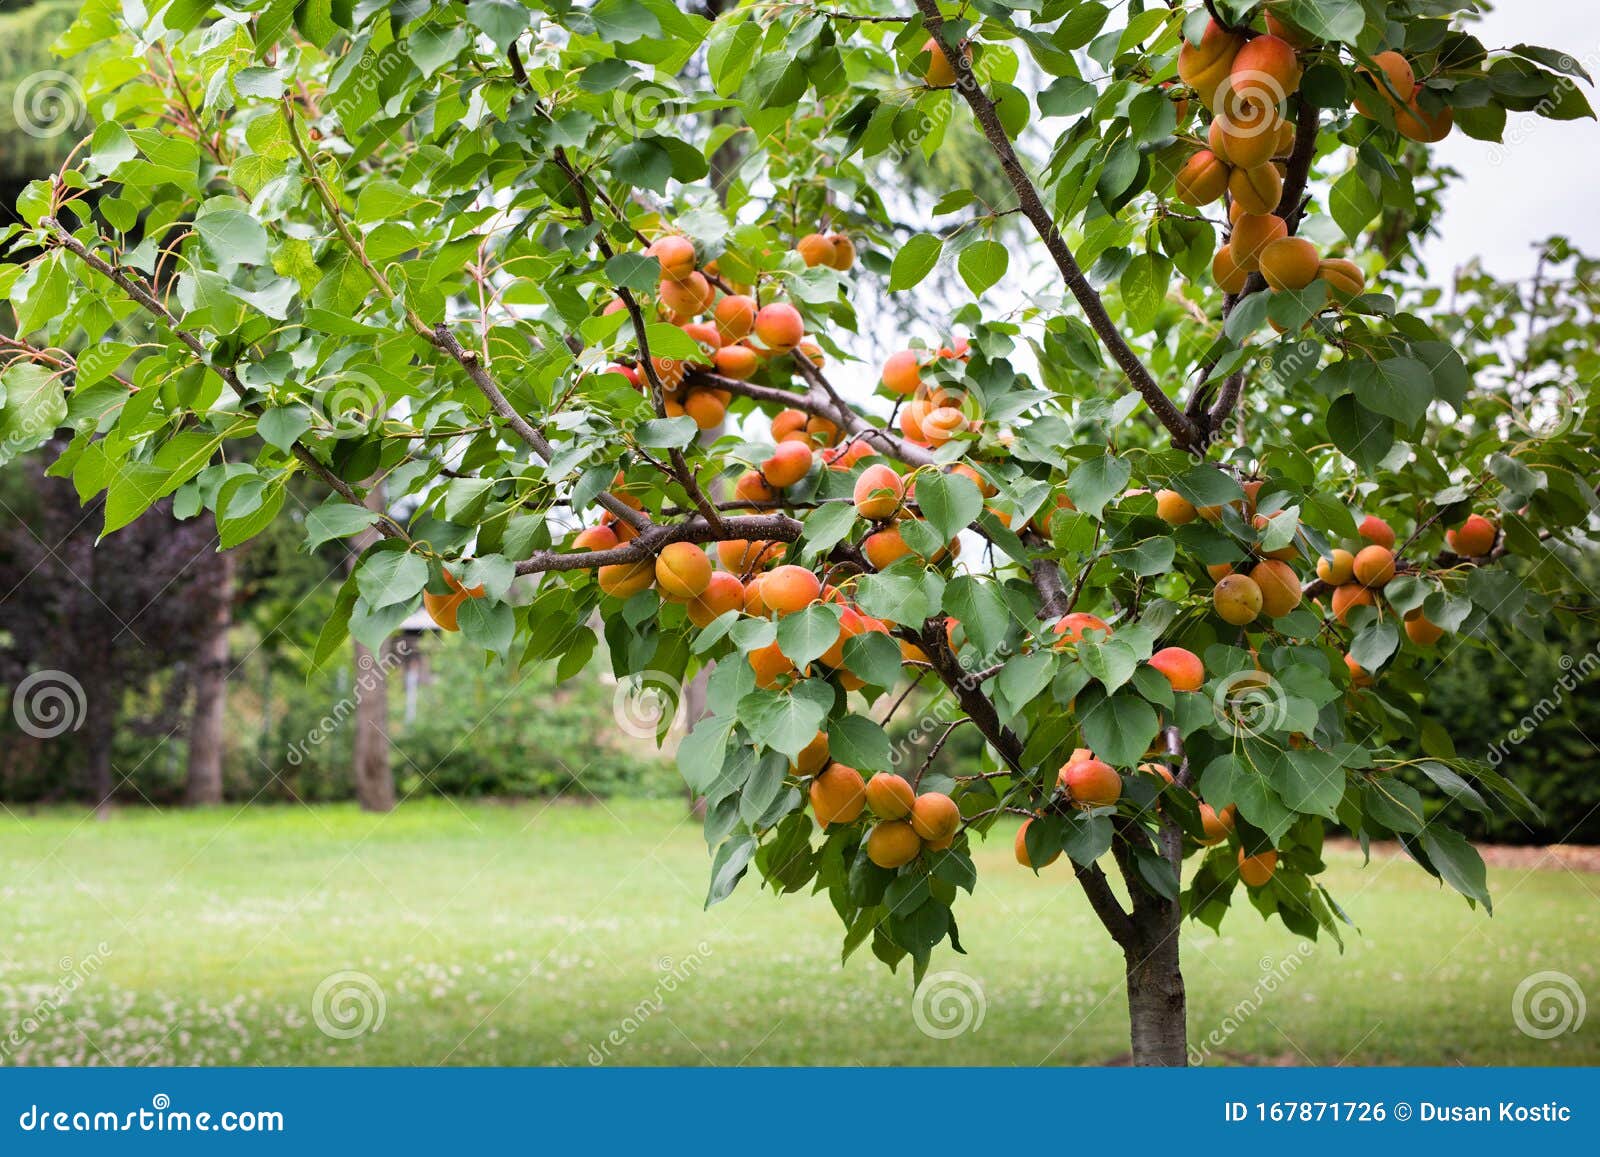 Ripe Apricots in the Orchard Stock Photo - Image of apricots, plant ...